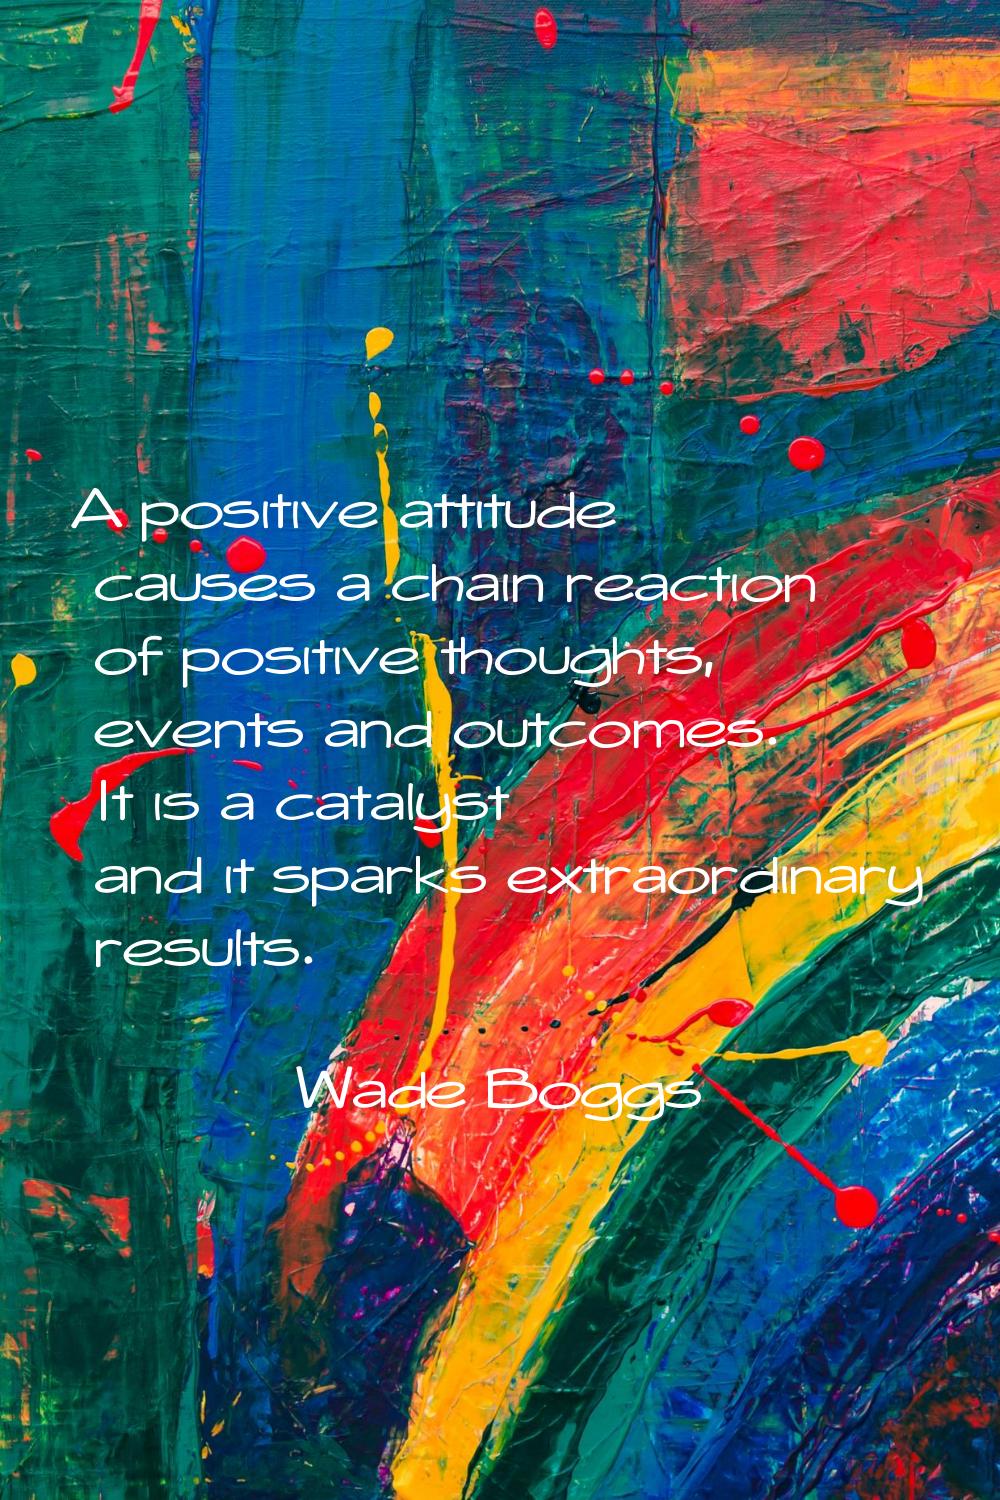 A positive attitude causes a chain reaction of positive thoughts, events and outcomes. It is a cata